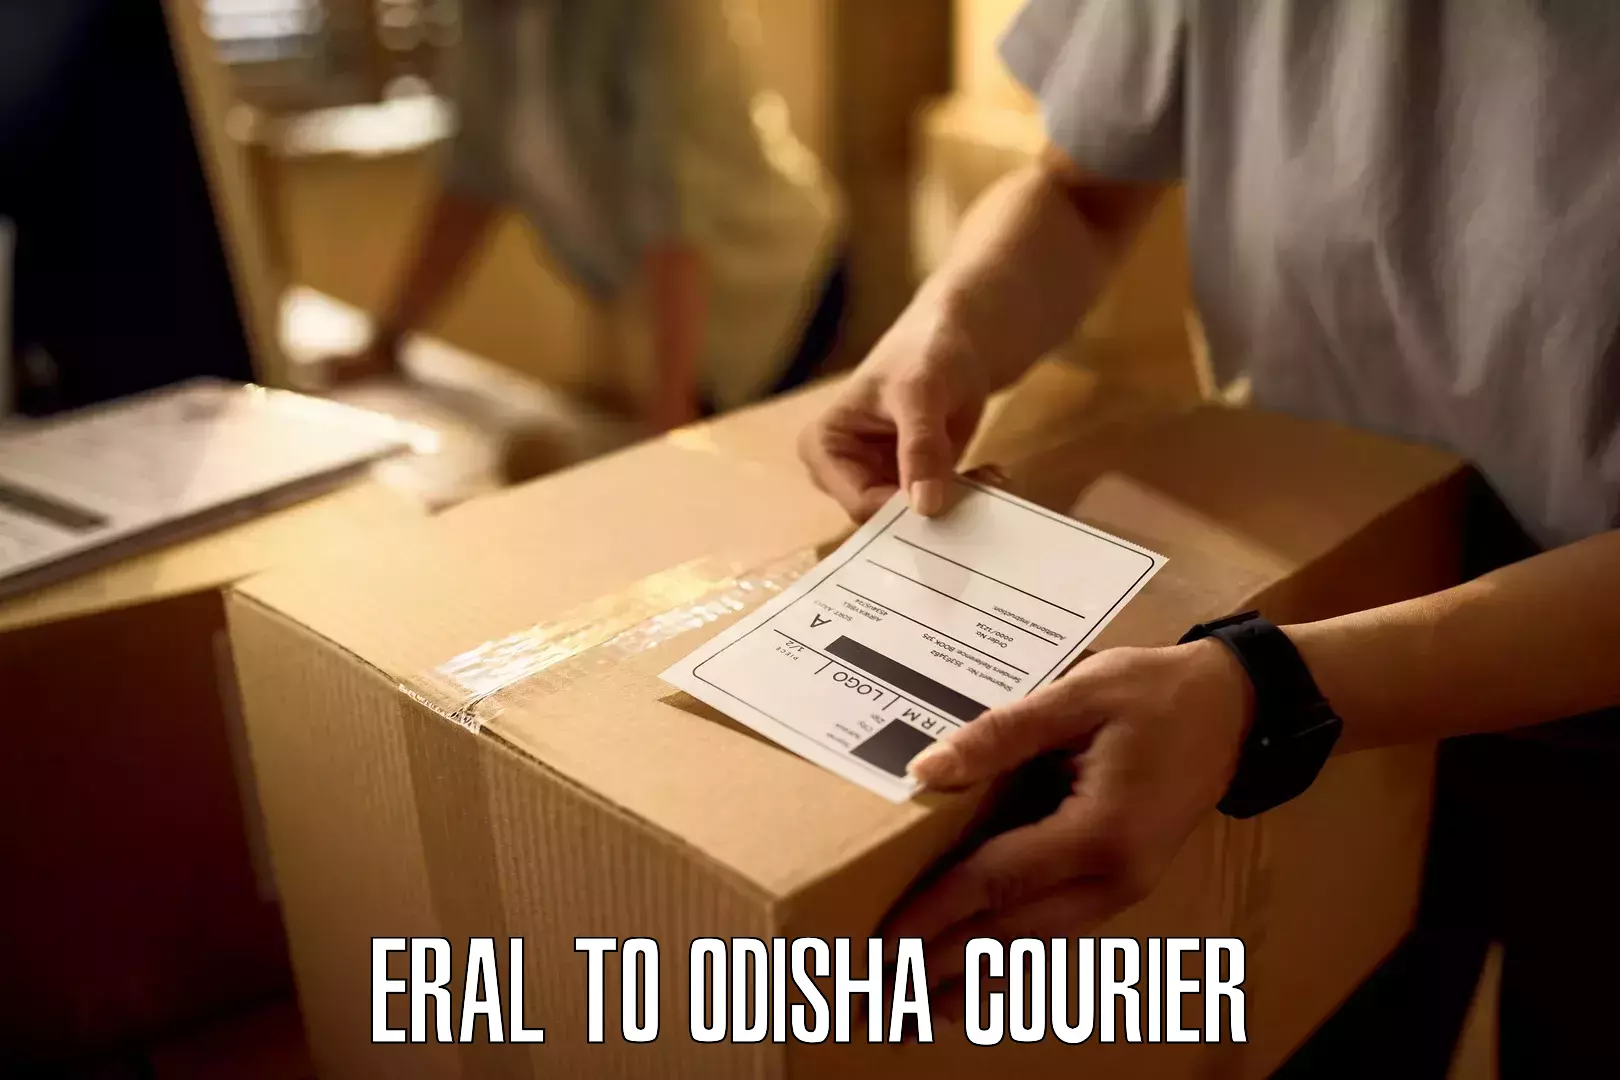 Multi-national courier services Eral to Barbil